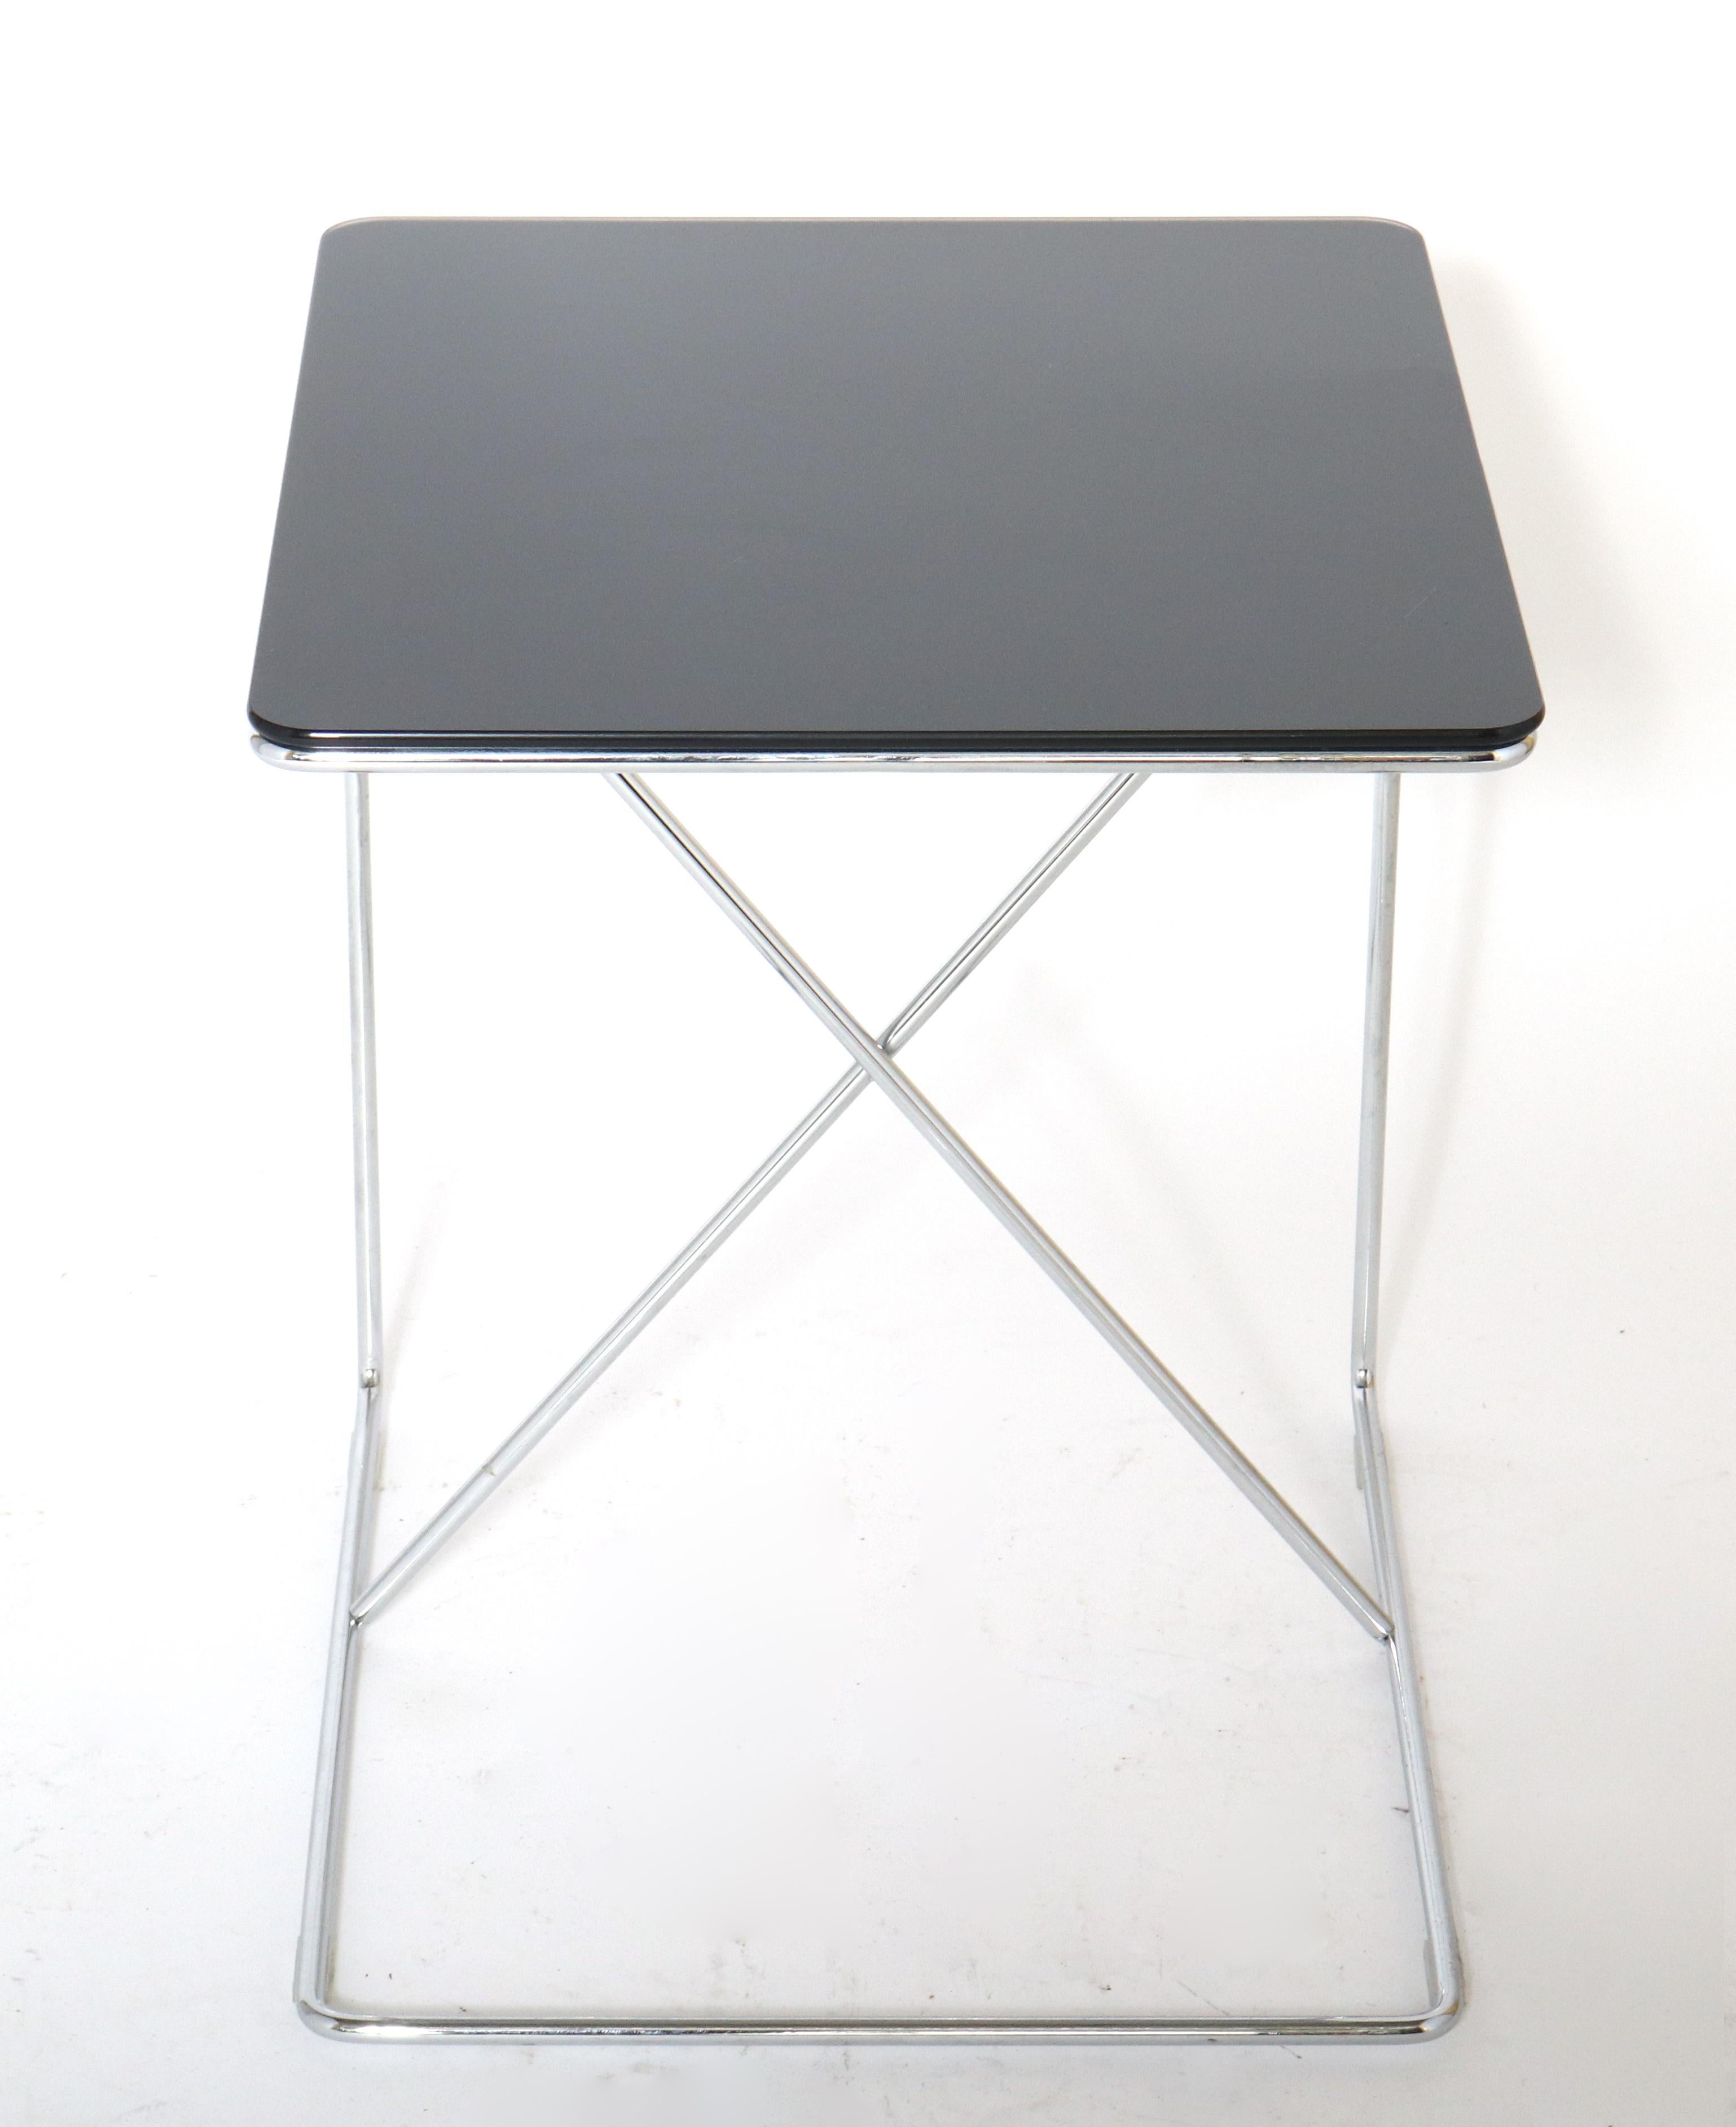 Modern glass and metal side C-table. The piece has a black glass top and a chromed metal base. In great vintage condition with age-appropriate wear and use.